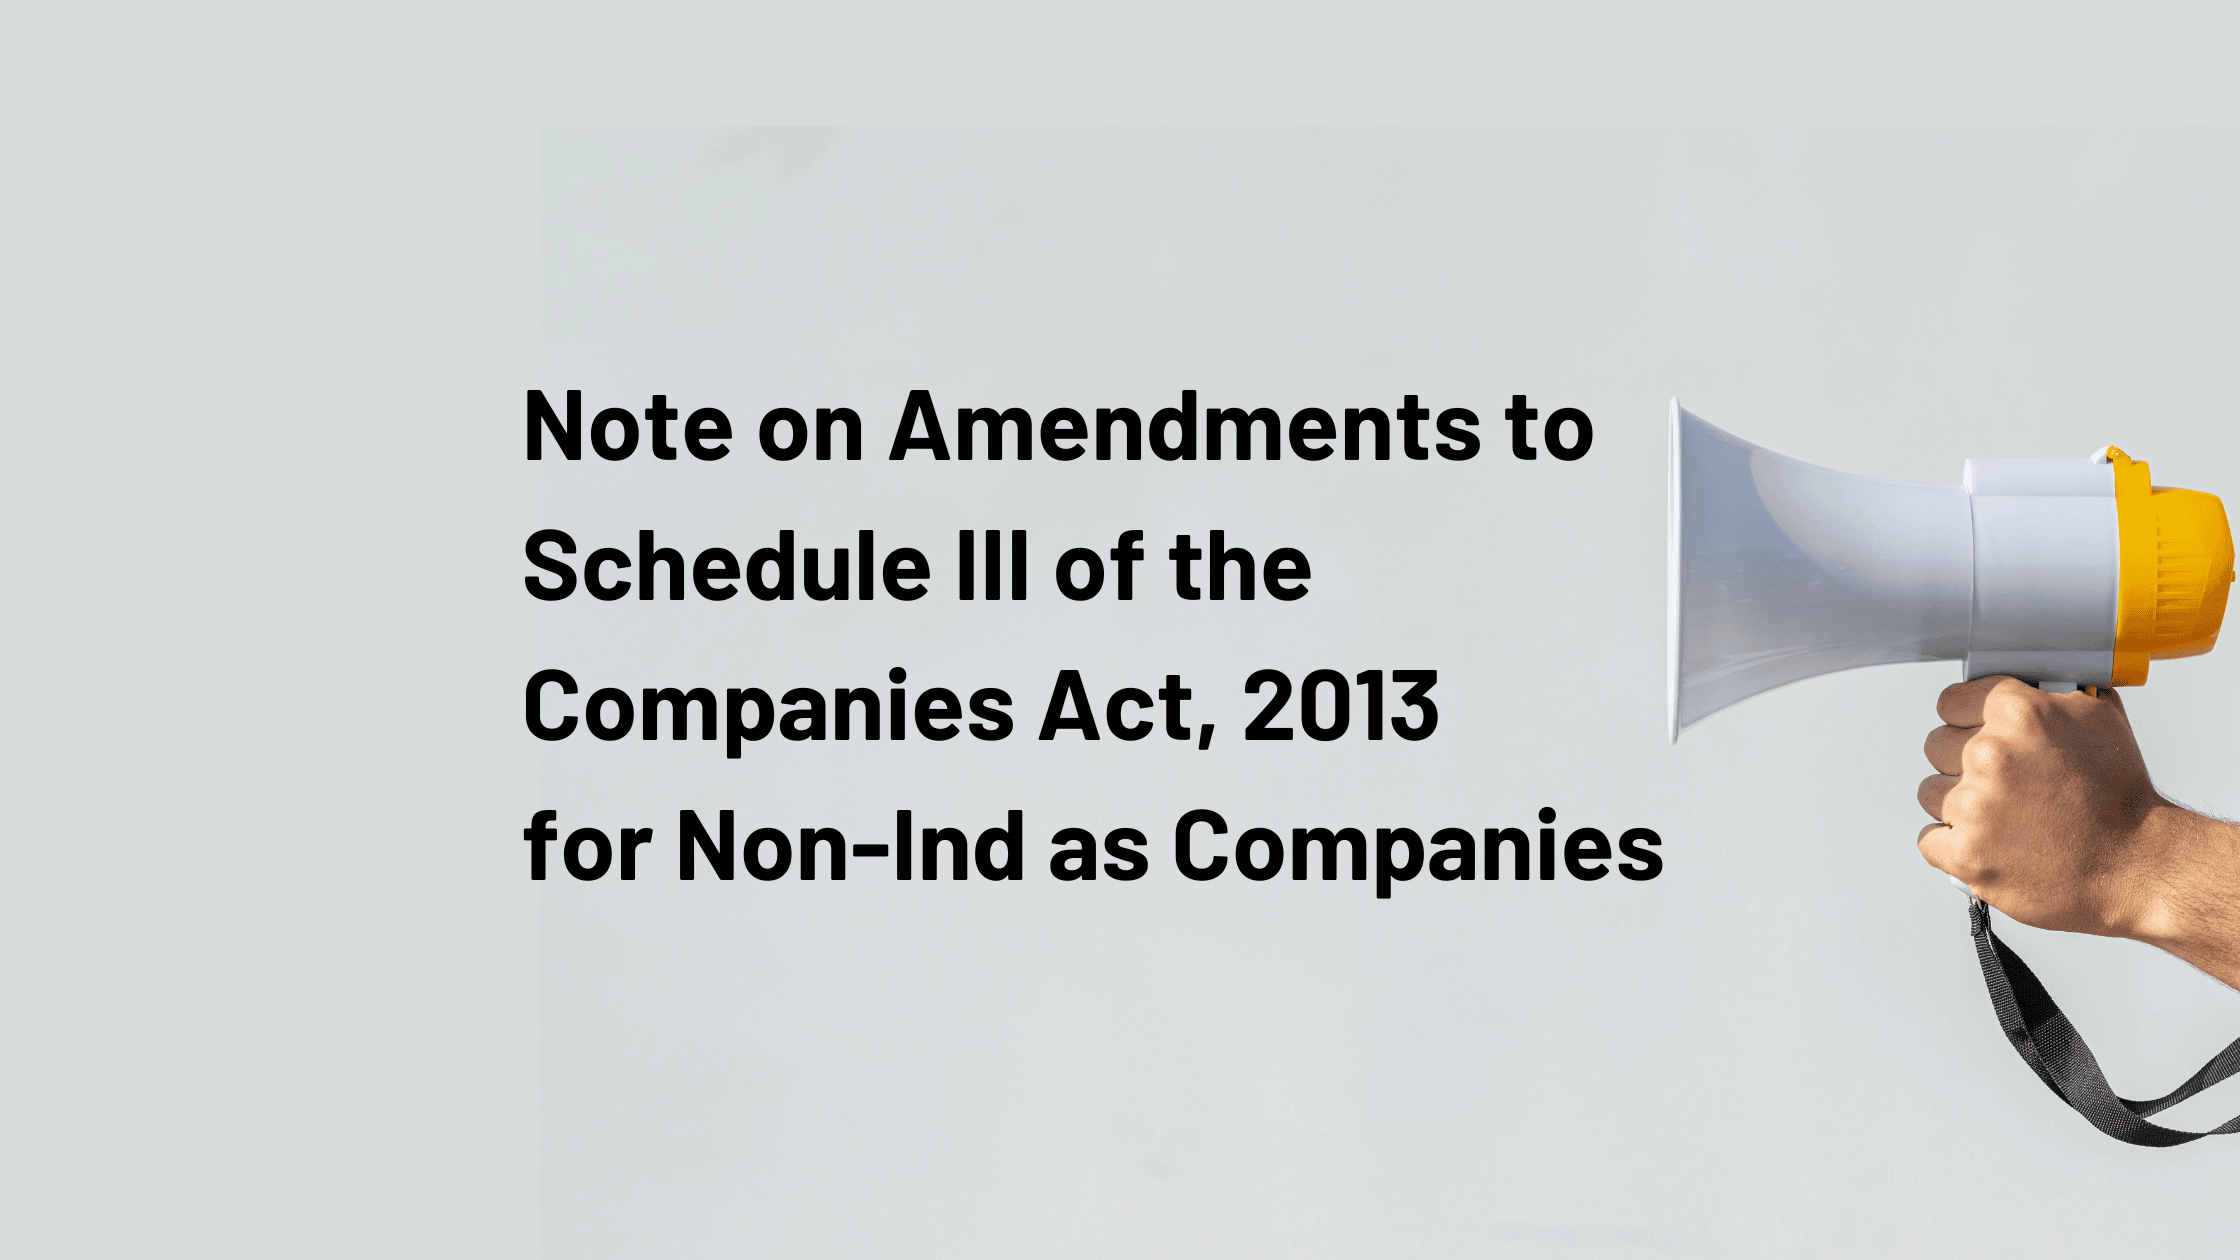 Note on Amendments to Schedule III of the Companies Act, 2013 for Non-Ind